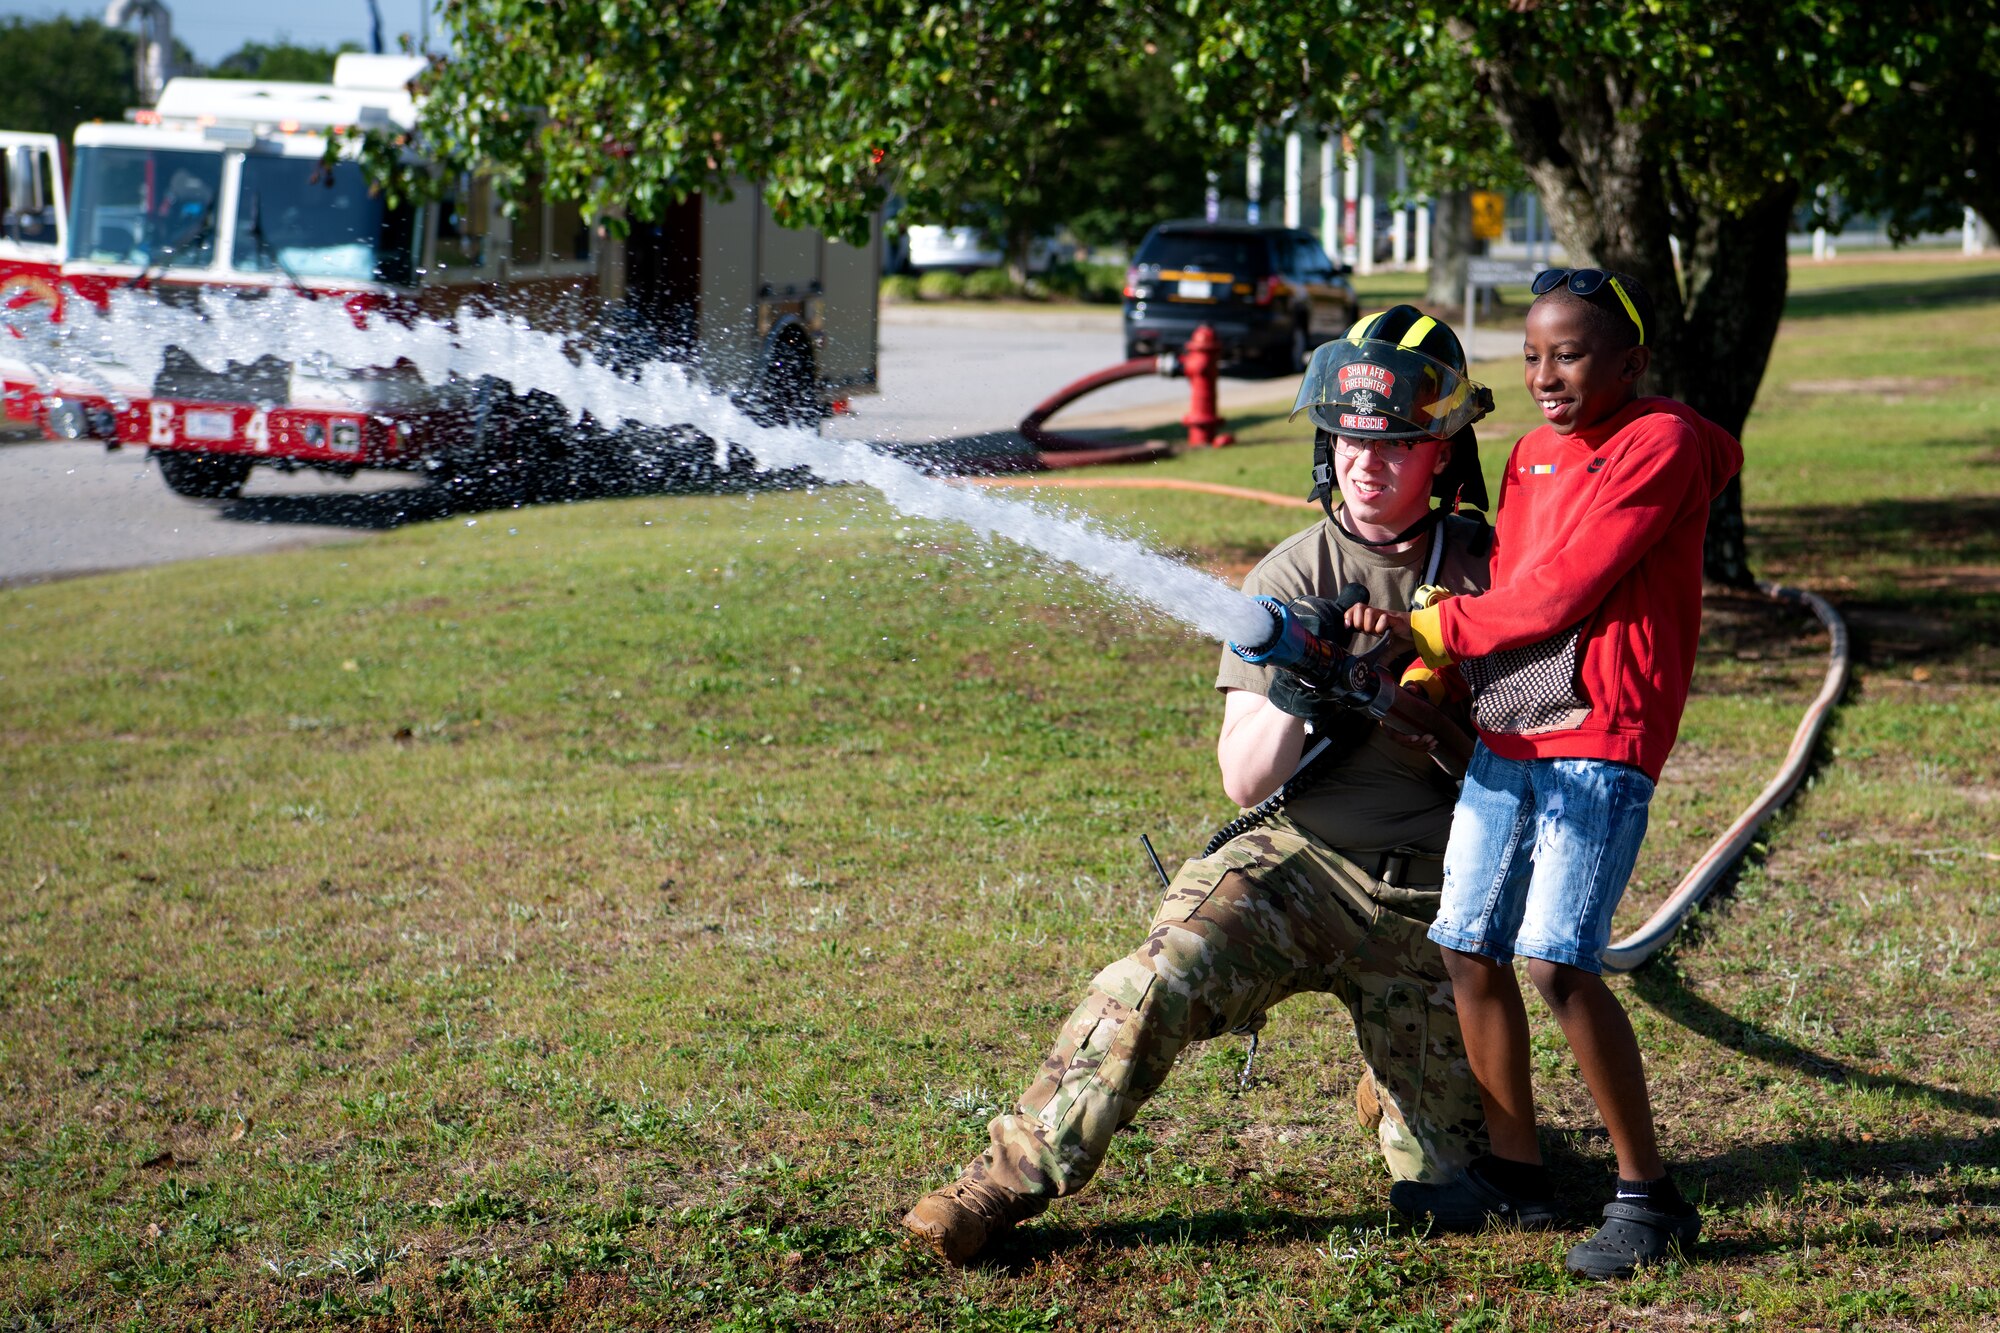 U.S. Air Force Airman 1st Class Logan Smith, 20th Civil Engineer Squadron (CES) firefighter, helps a student aim a fire hose during a combined Earth Day and Career Day event at High Hills Elementary School, Sumter, S.C., April 21, 2023. The 20th CES spearheaded the partnership with High Hills, putting on the event for 430 students for the second year in a row. (U.S. Air Force photo by Staff Sgt. Kelsey Owen)